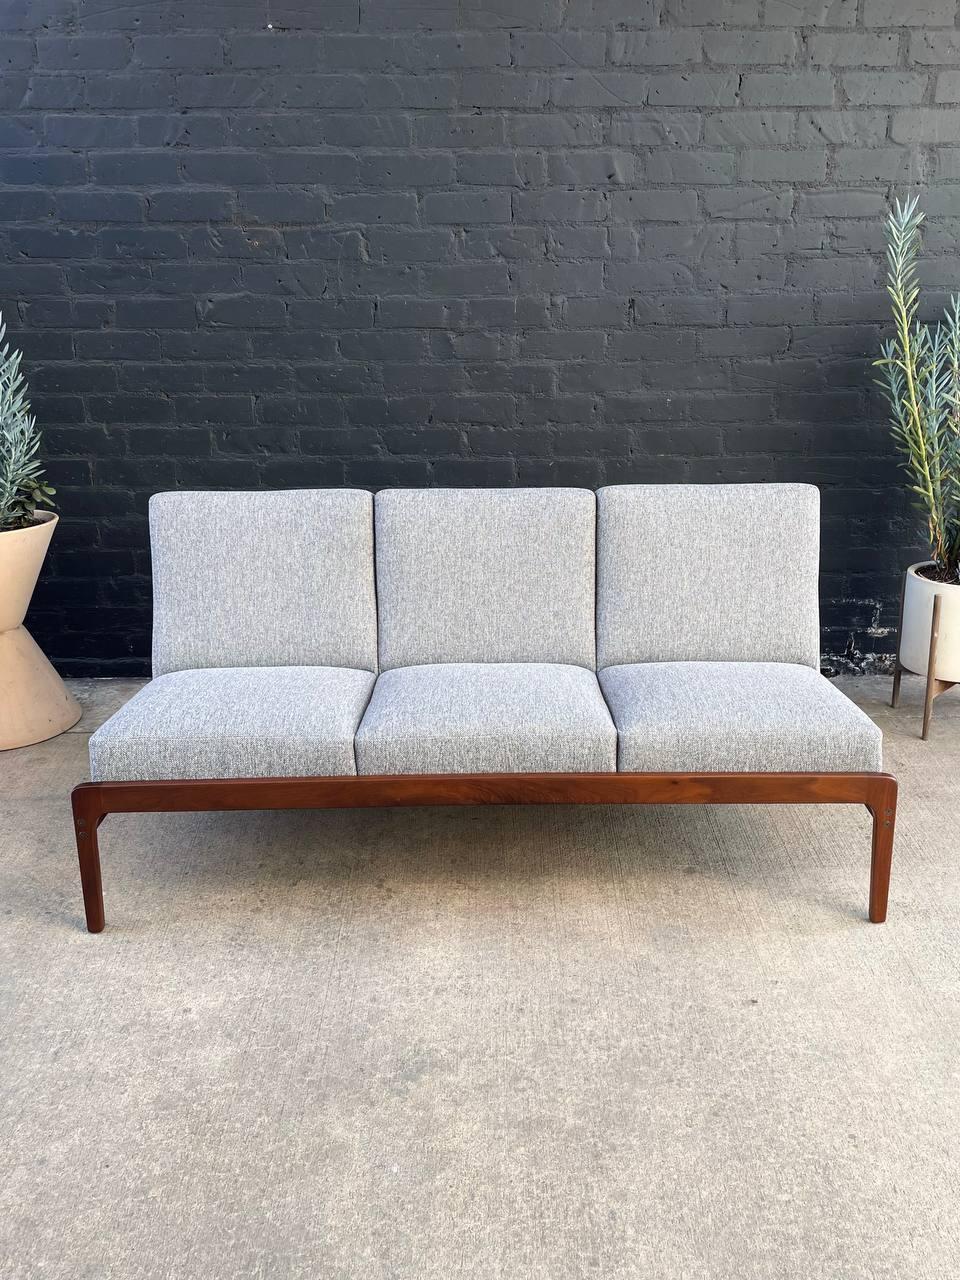 Newly Refinished - Mid-Century Modern Sculpted Walnut & New Tweed Fabric Sofa In Excellent Condition For Sale In Los Angeles, CA